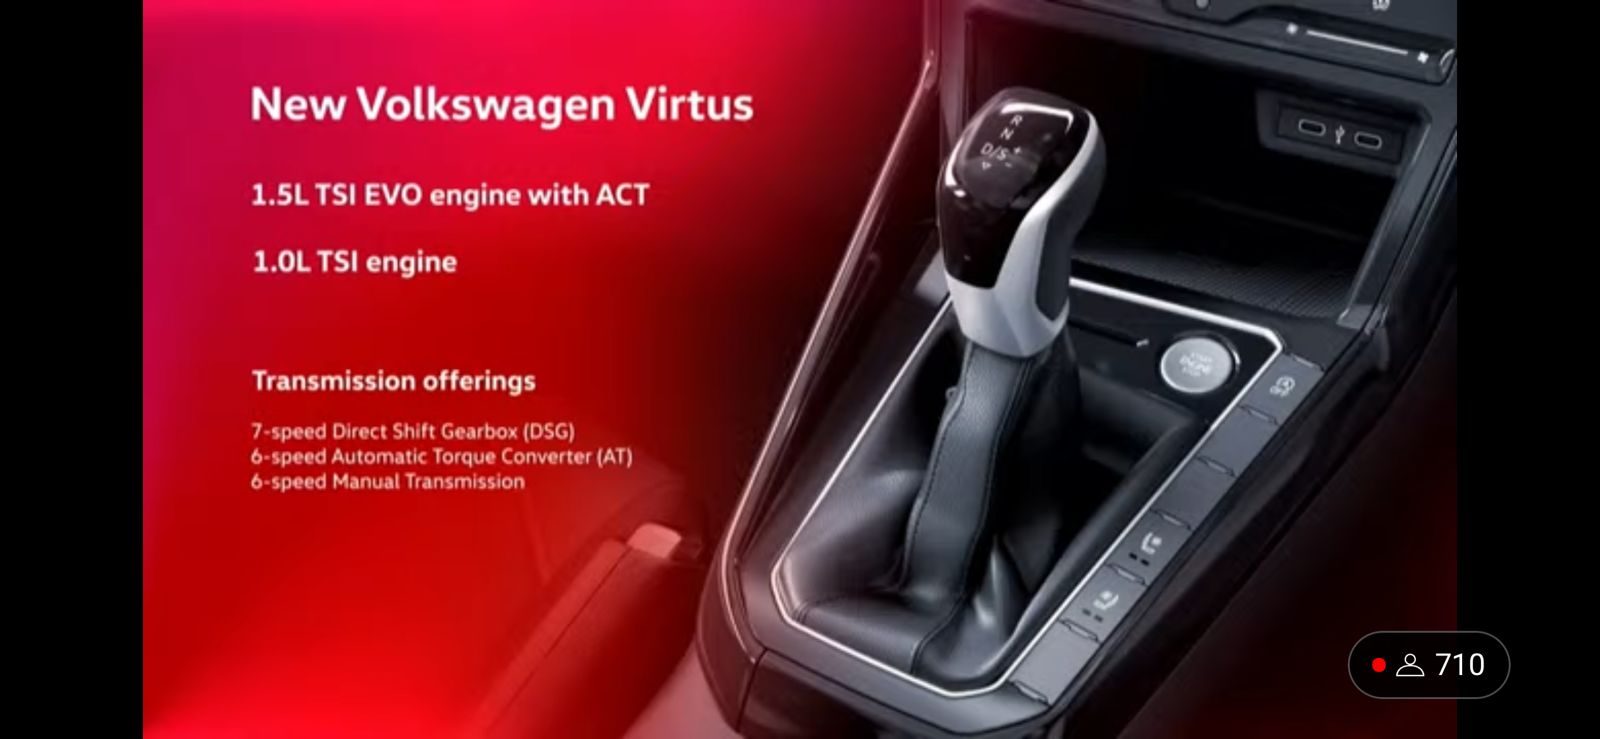 <p>The Volkswagen Virtus will be available in 2 different engines and 3 transmission options</p>